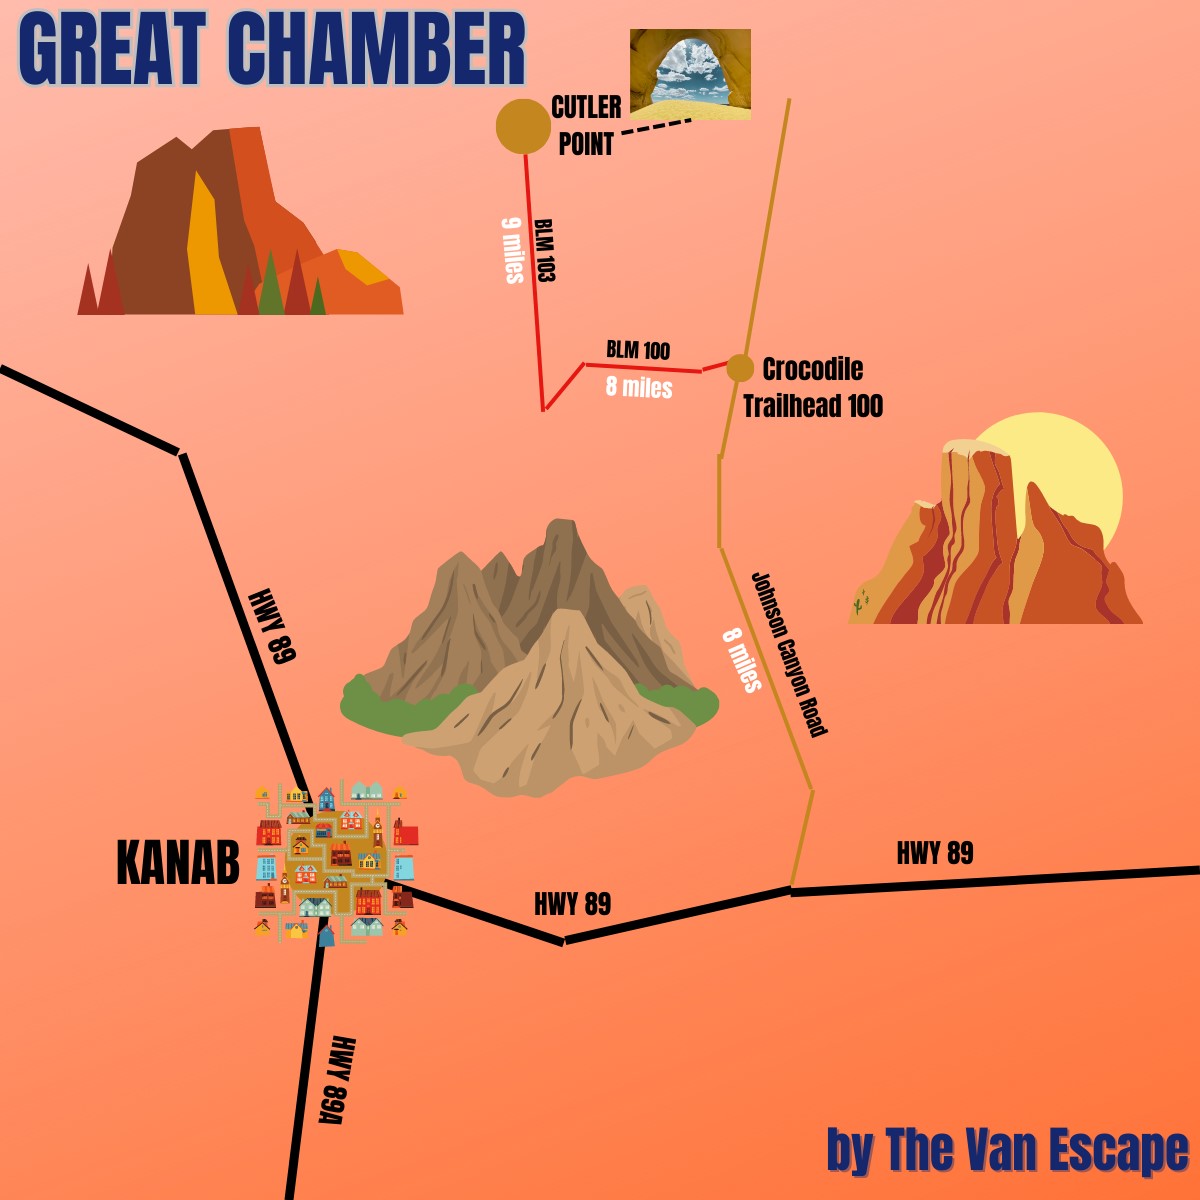 How to get to the Great Chamber infographic